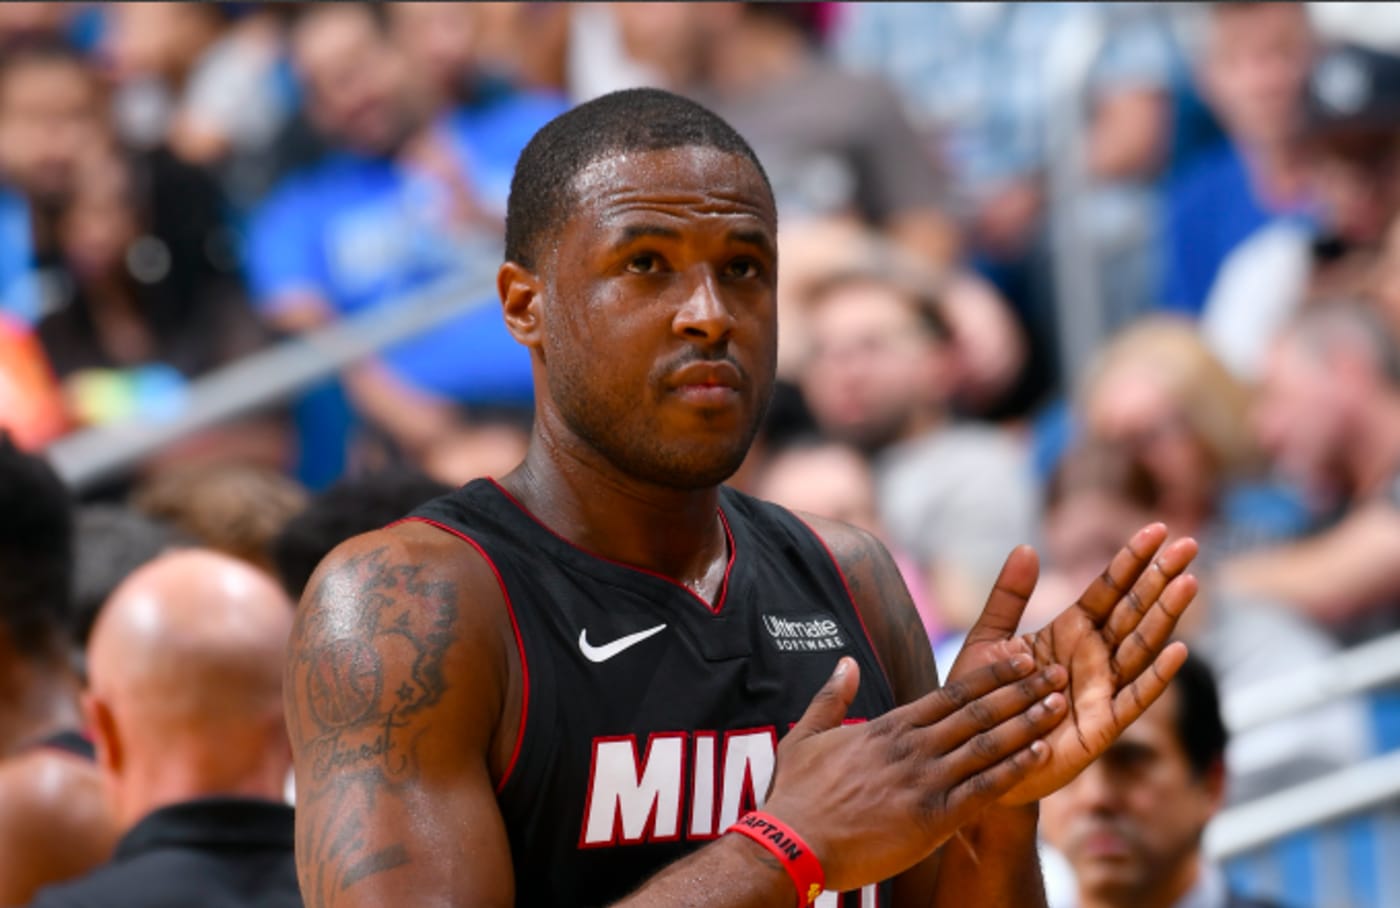 Dion Waiters #11 of the Miami Heat